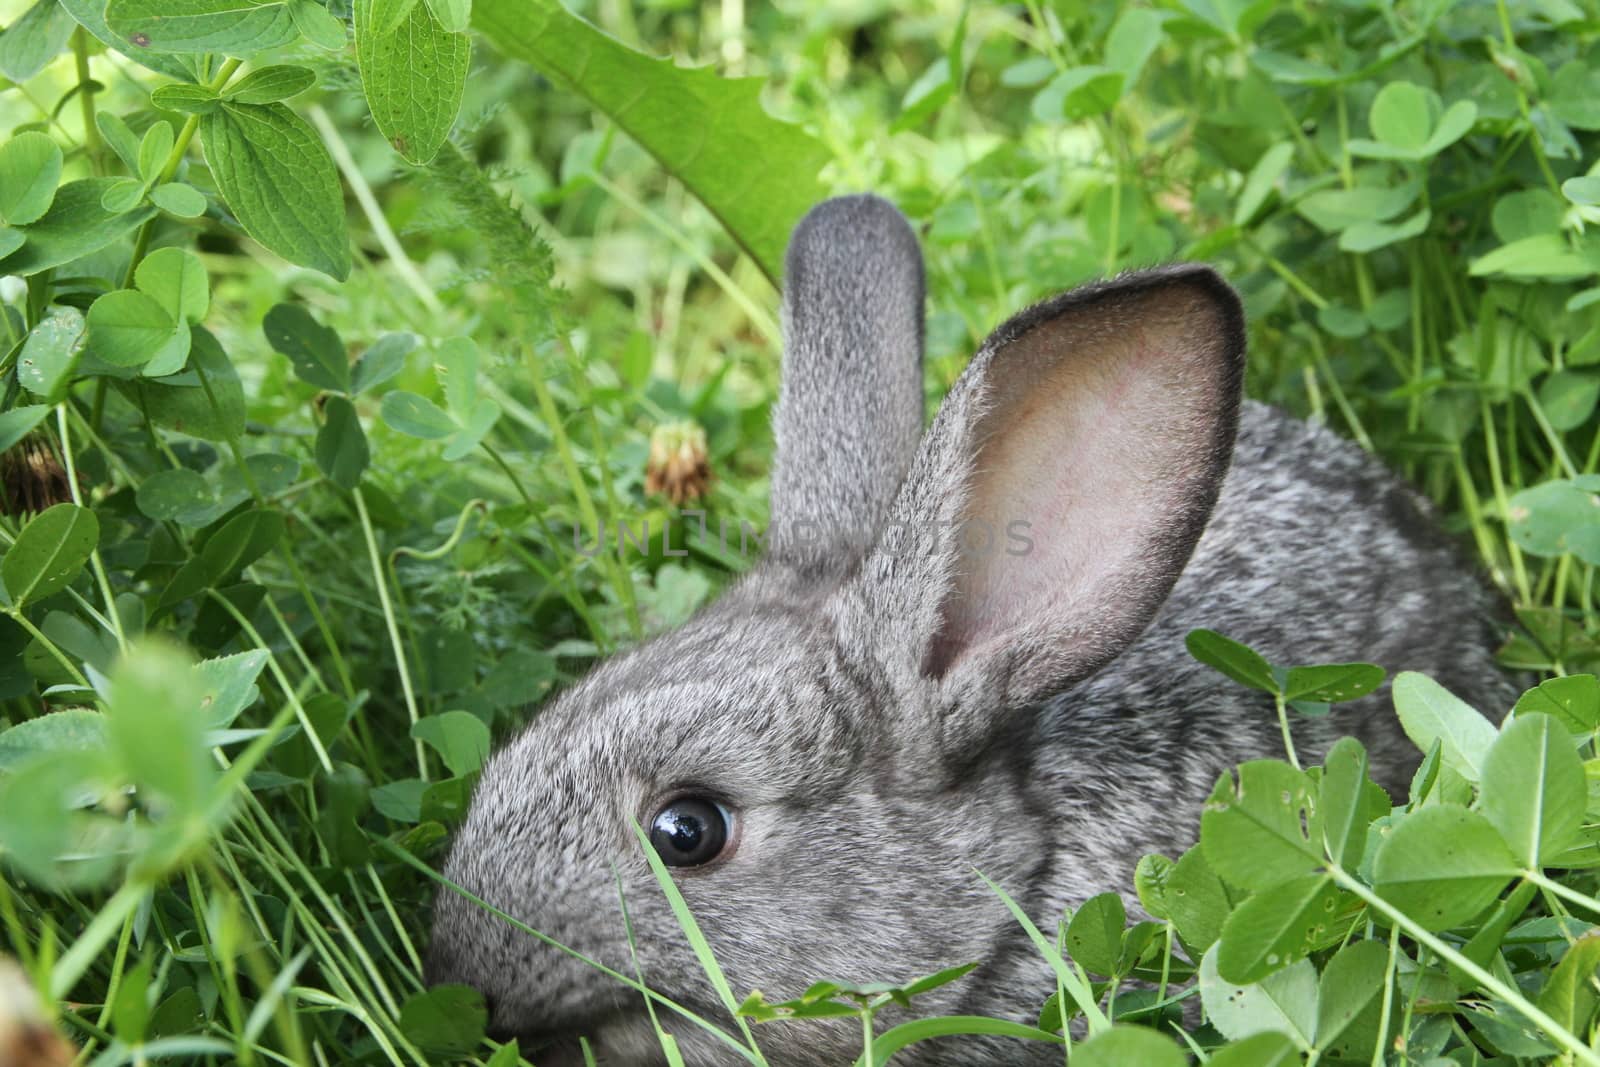 Grey rabbit among the clover on the lawn. Closeup